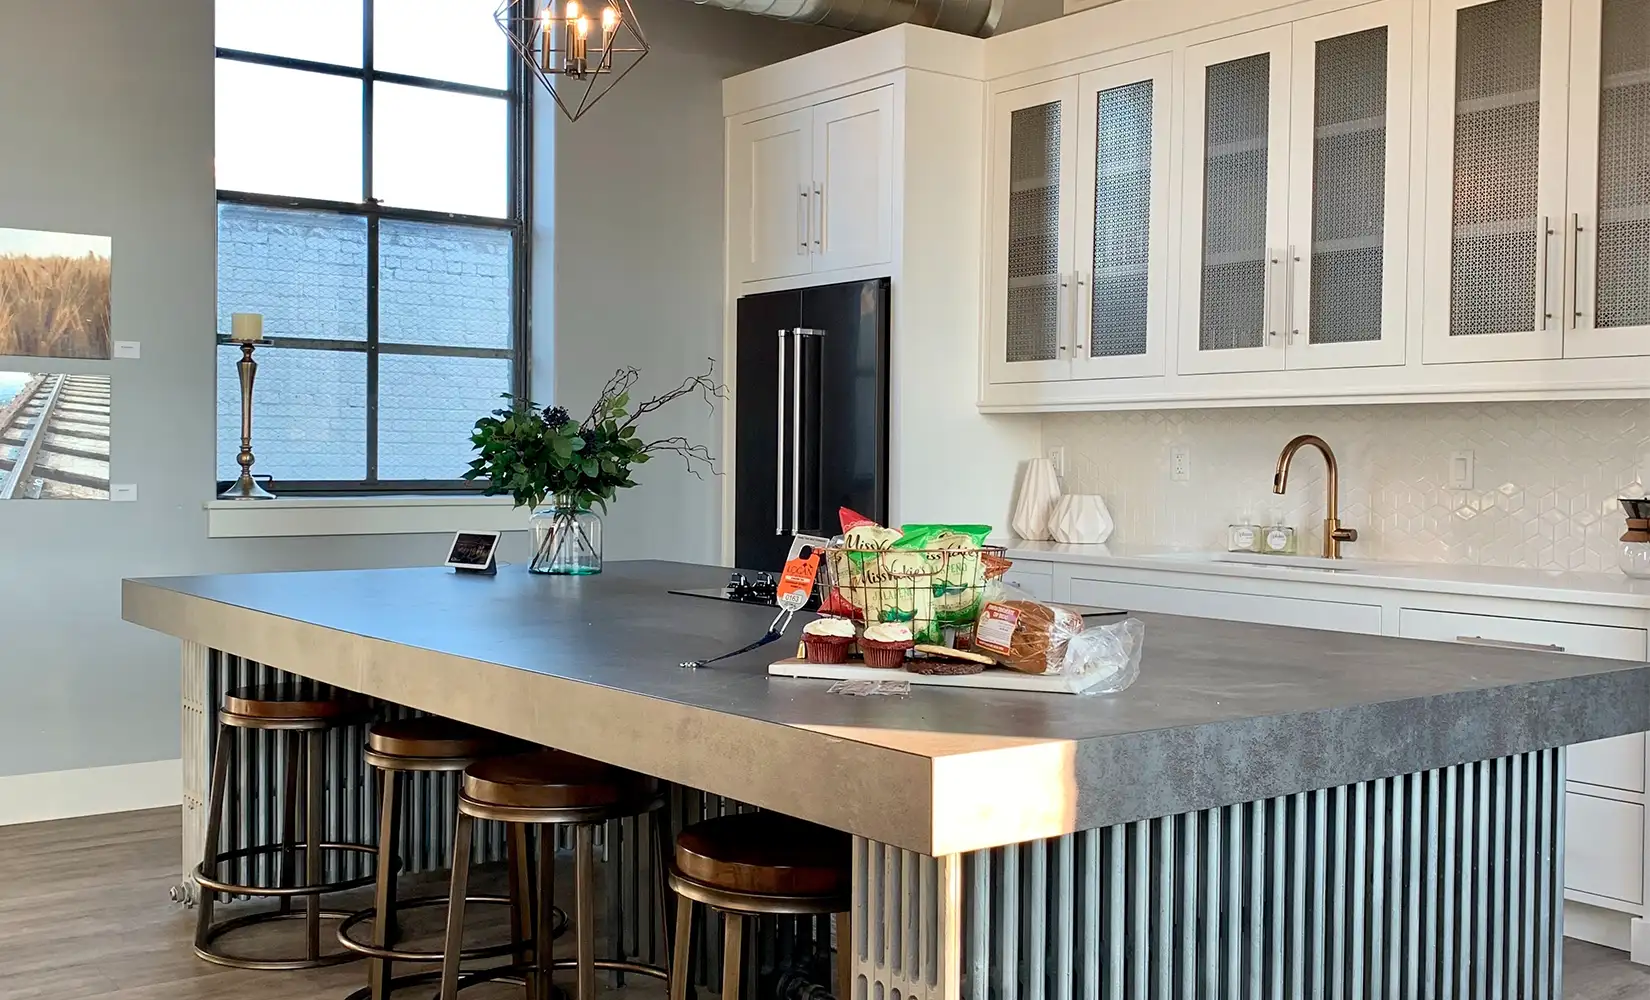 Industrial kitchen with wooden kitchen island decor and pendant light fixtures.